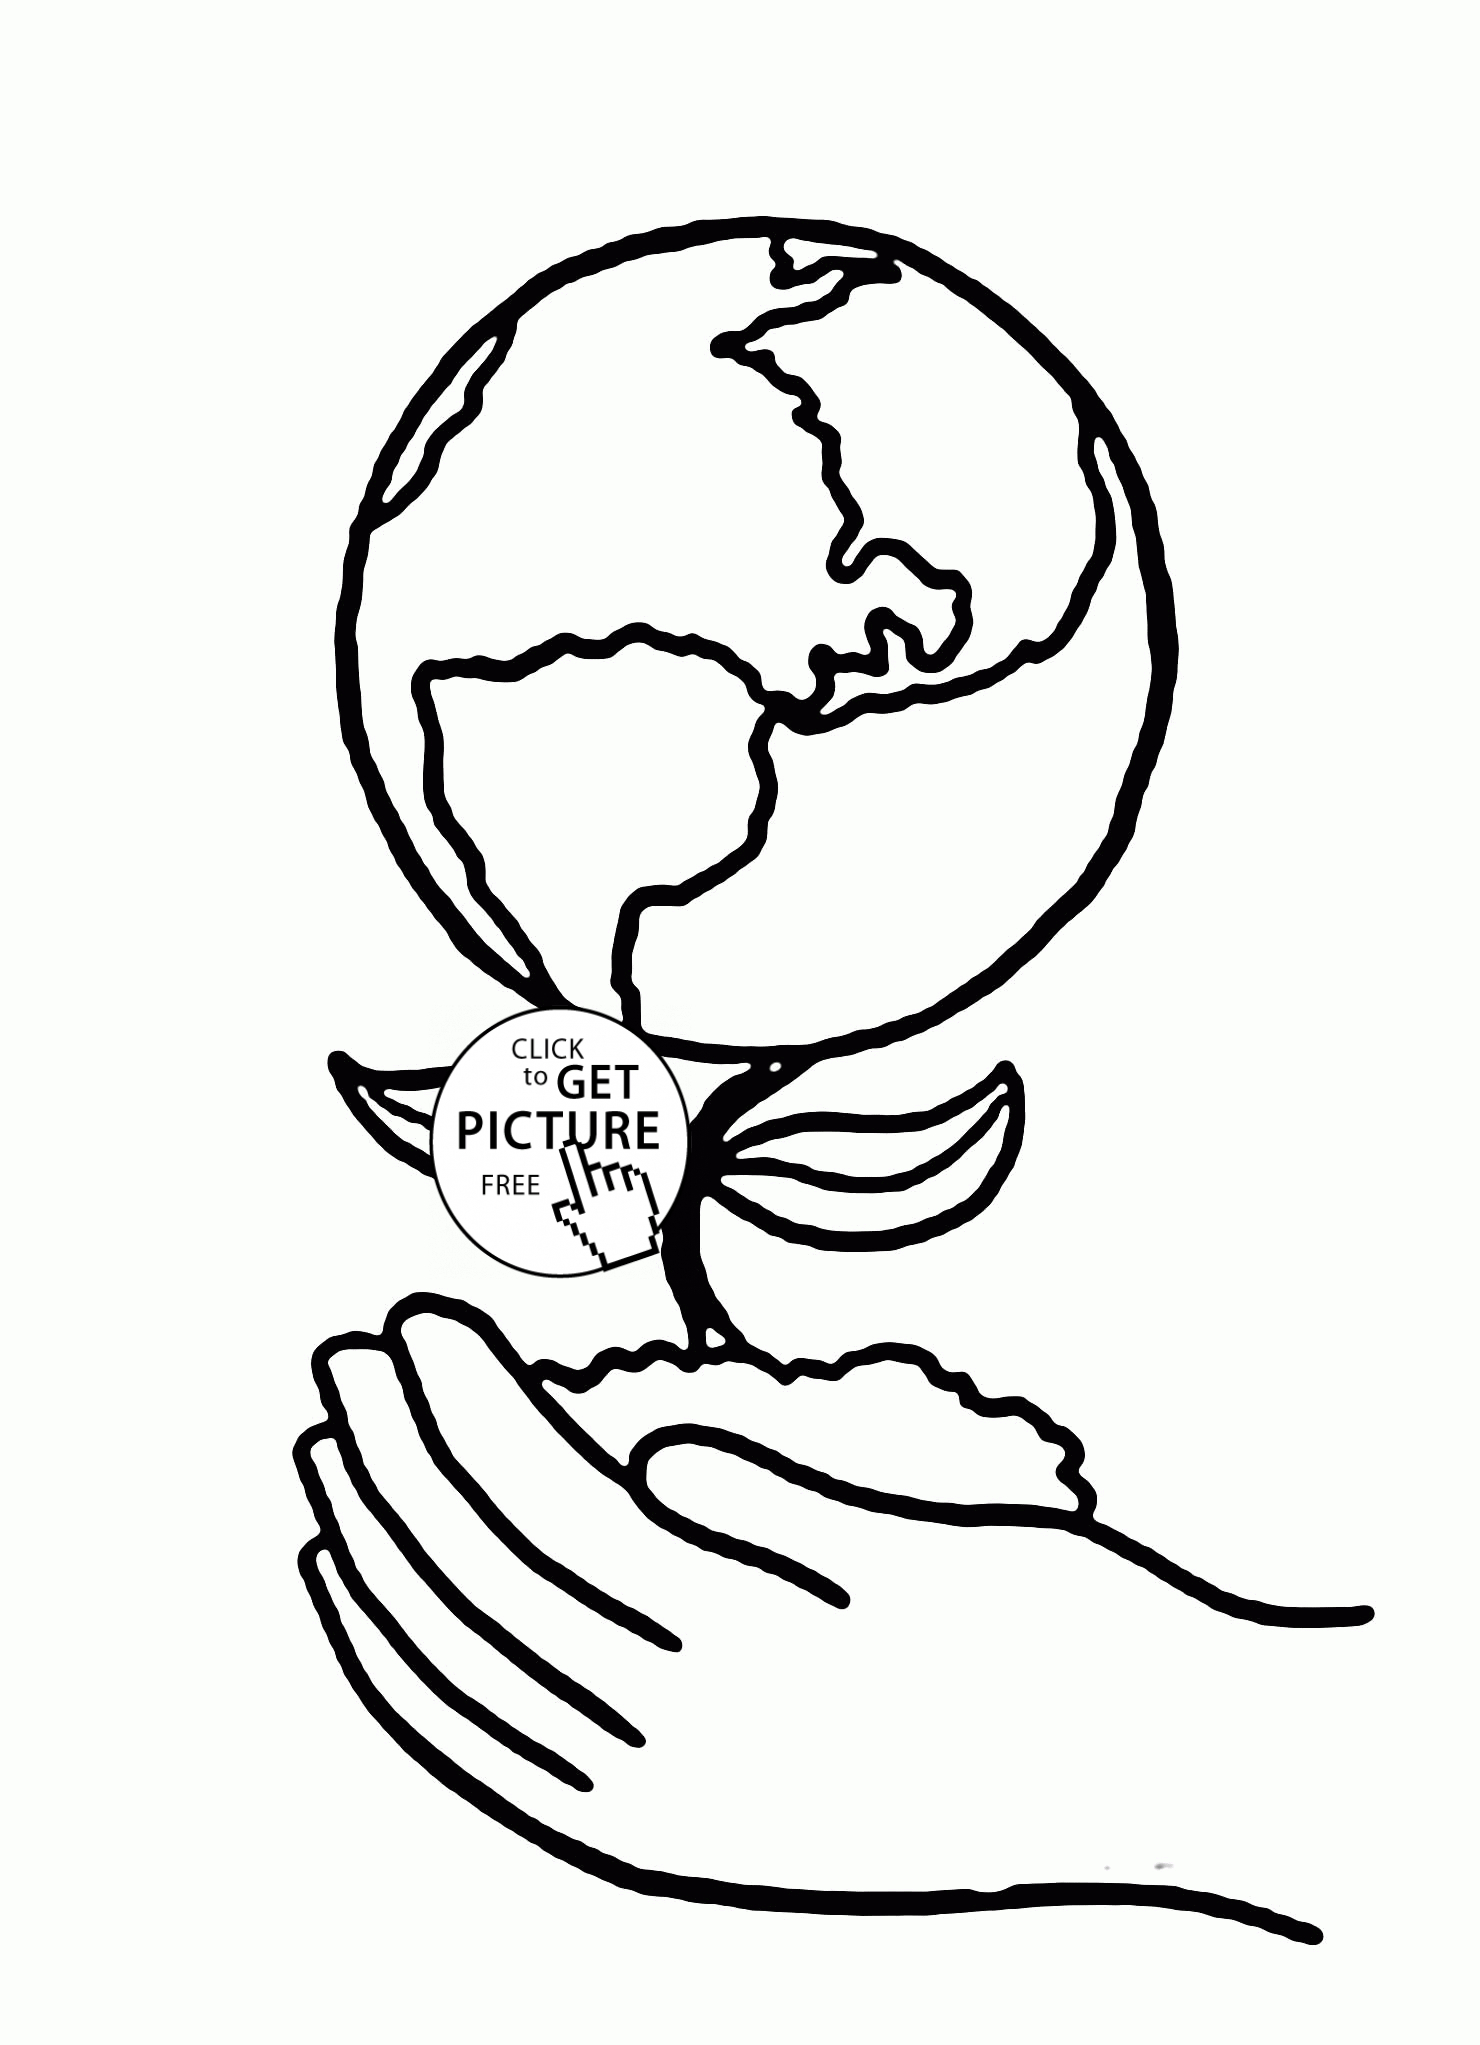 Free Printable Earth Day Coloring Pages And Activities Earth Plant On Hands Earth Day Coloring Page For Kids Coloring